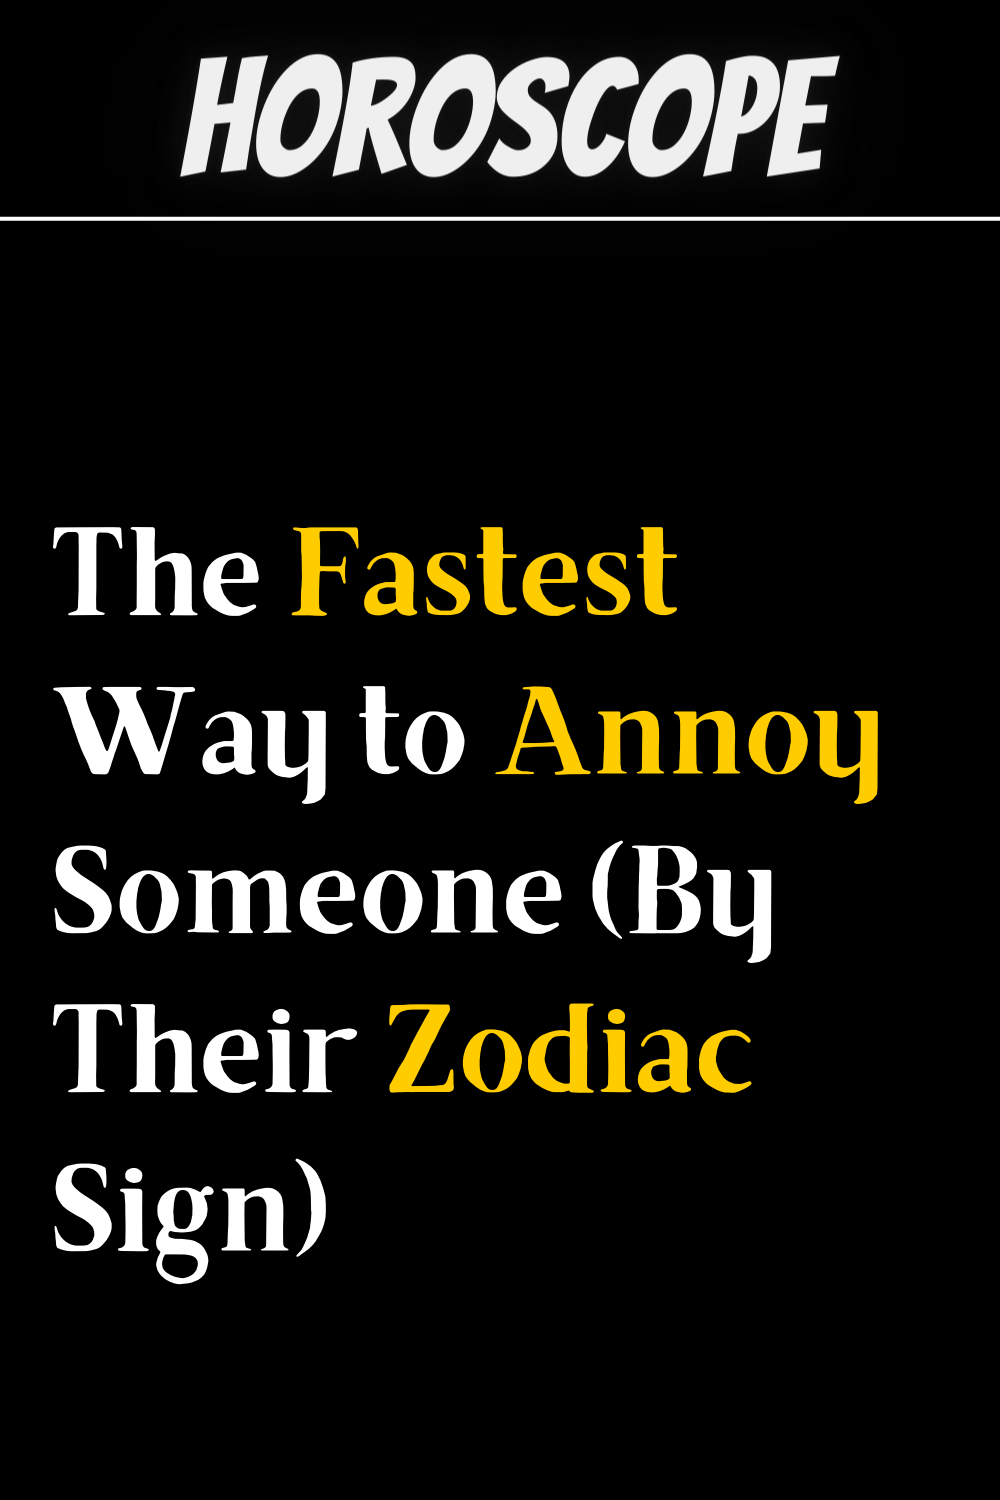 The Fastest Way to Annoy Someone (By Their Zodiac Sign)